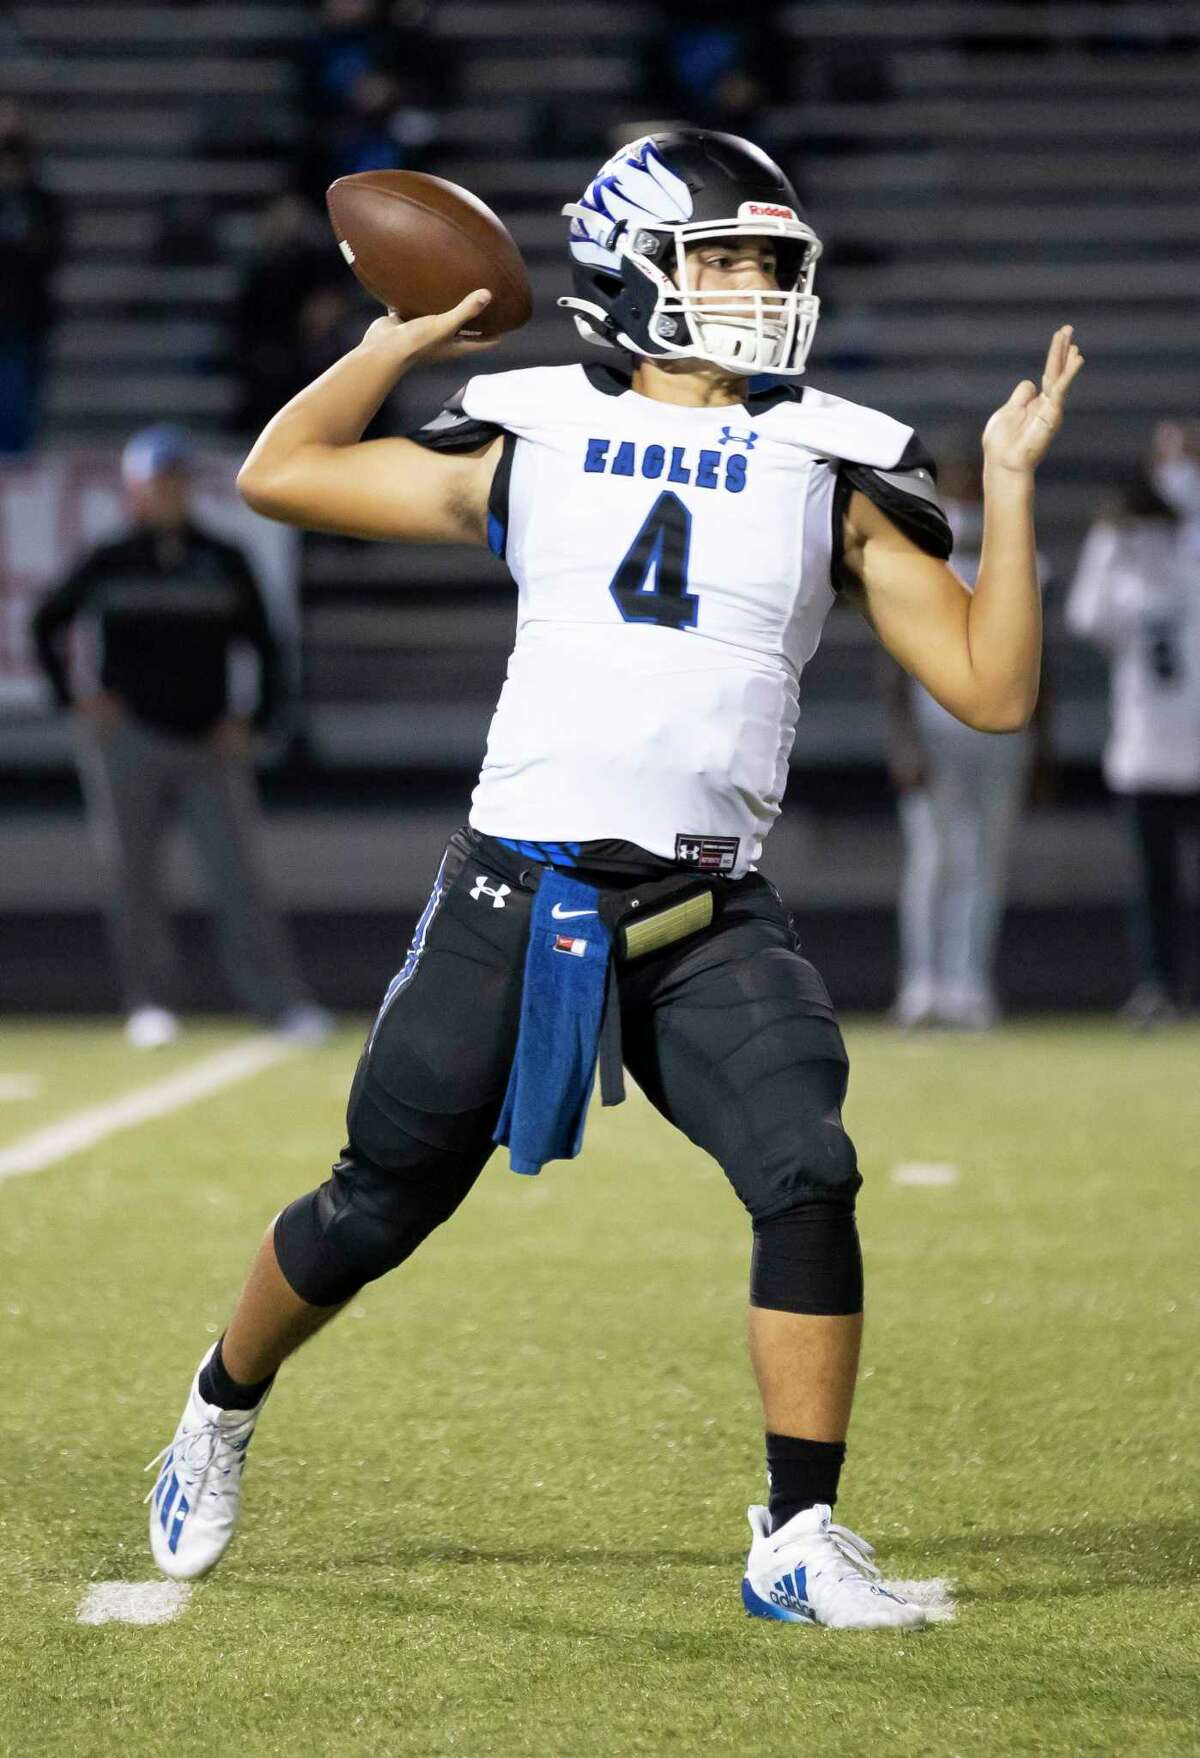 New Caney quarterback Jaydon Tutwiler-Drew (4) passes the ball during the first quarter of a District 8-5A (Div. I) football game against Caney Creek at Moorhead Stadium in Conroe.